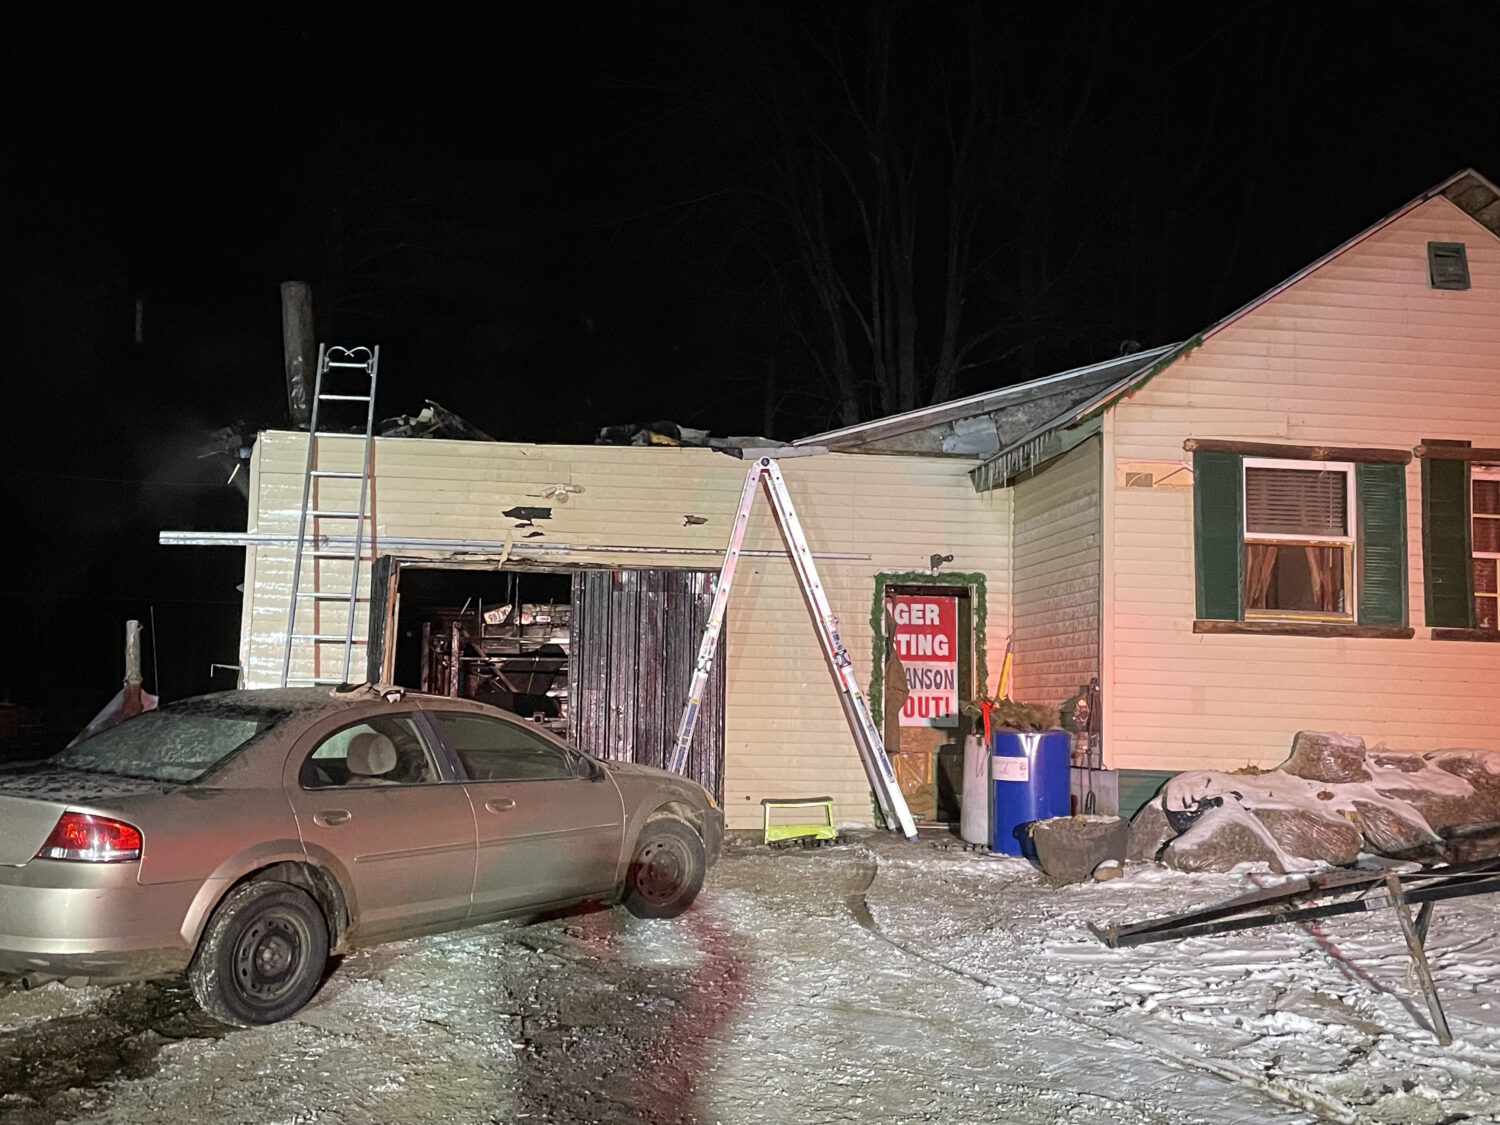 Monday night Town of Merrill fire contained to garage